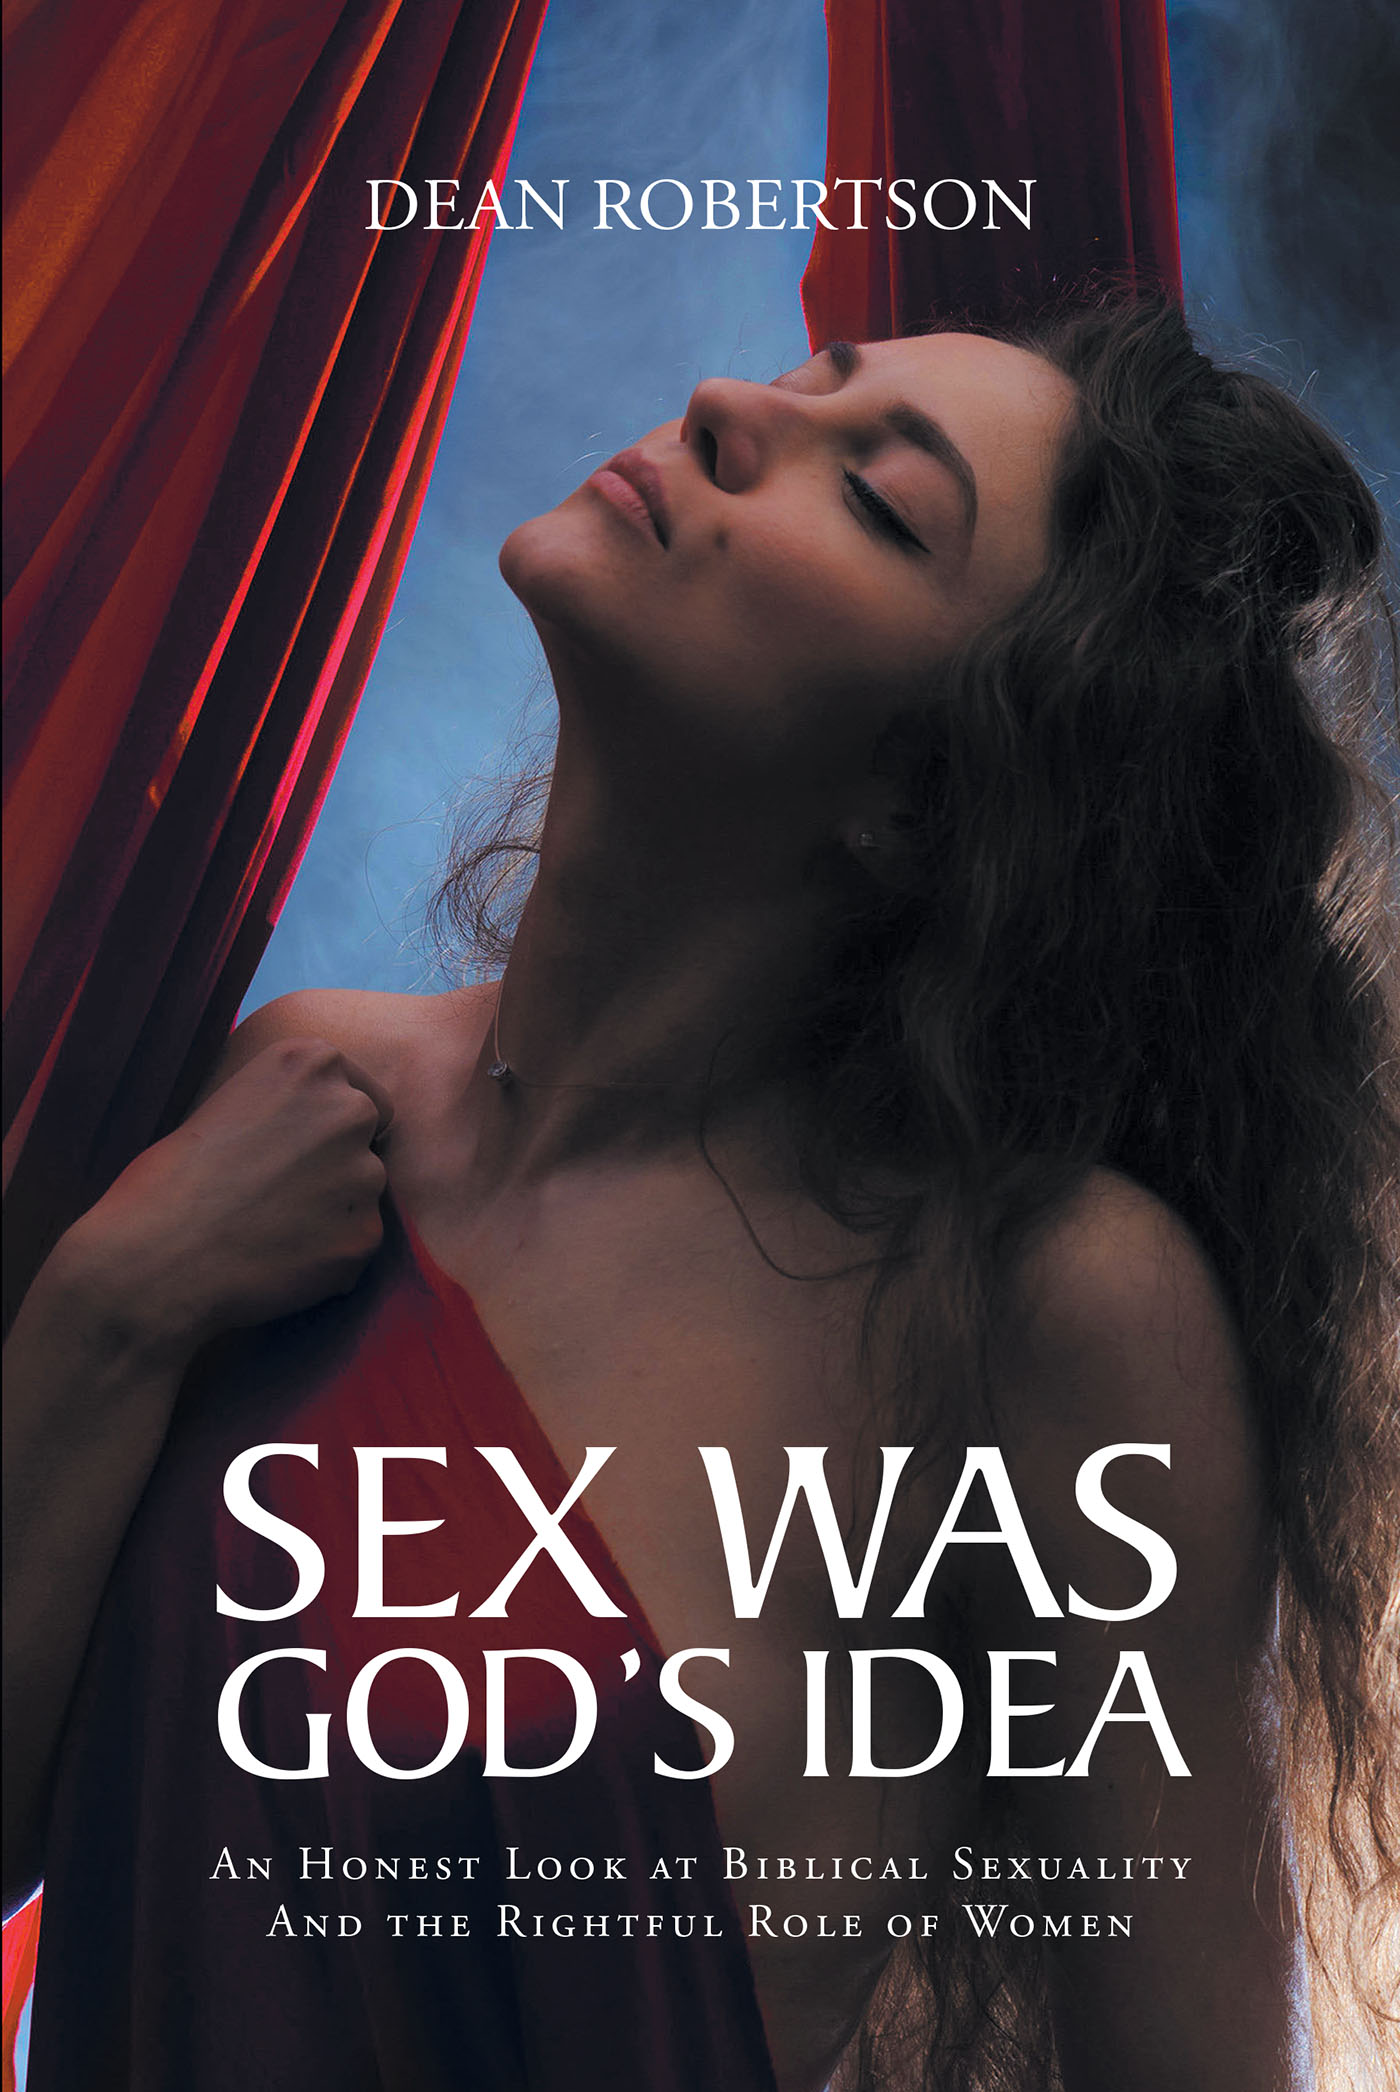 Dean Robertson’s Newly Released "Sex Was God’s Idea" is an Eye-Opening Examination of Key Scripture Related to Marriage and Sex